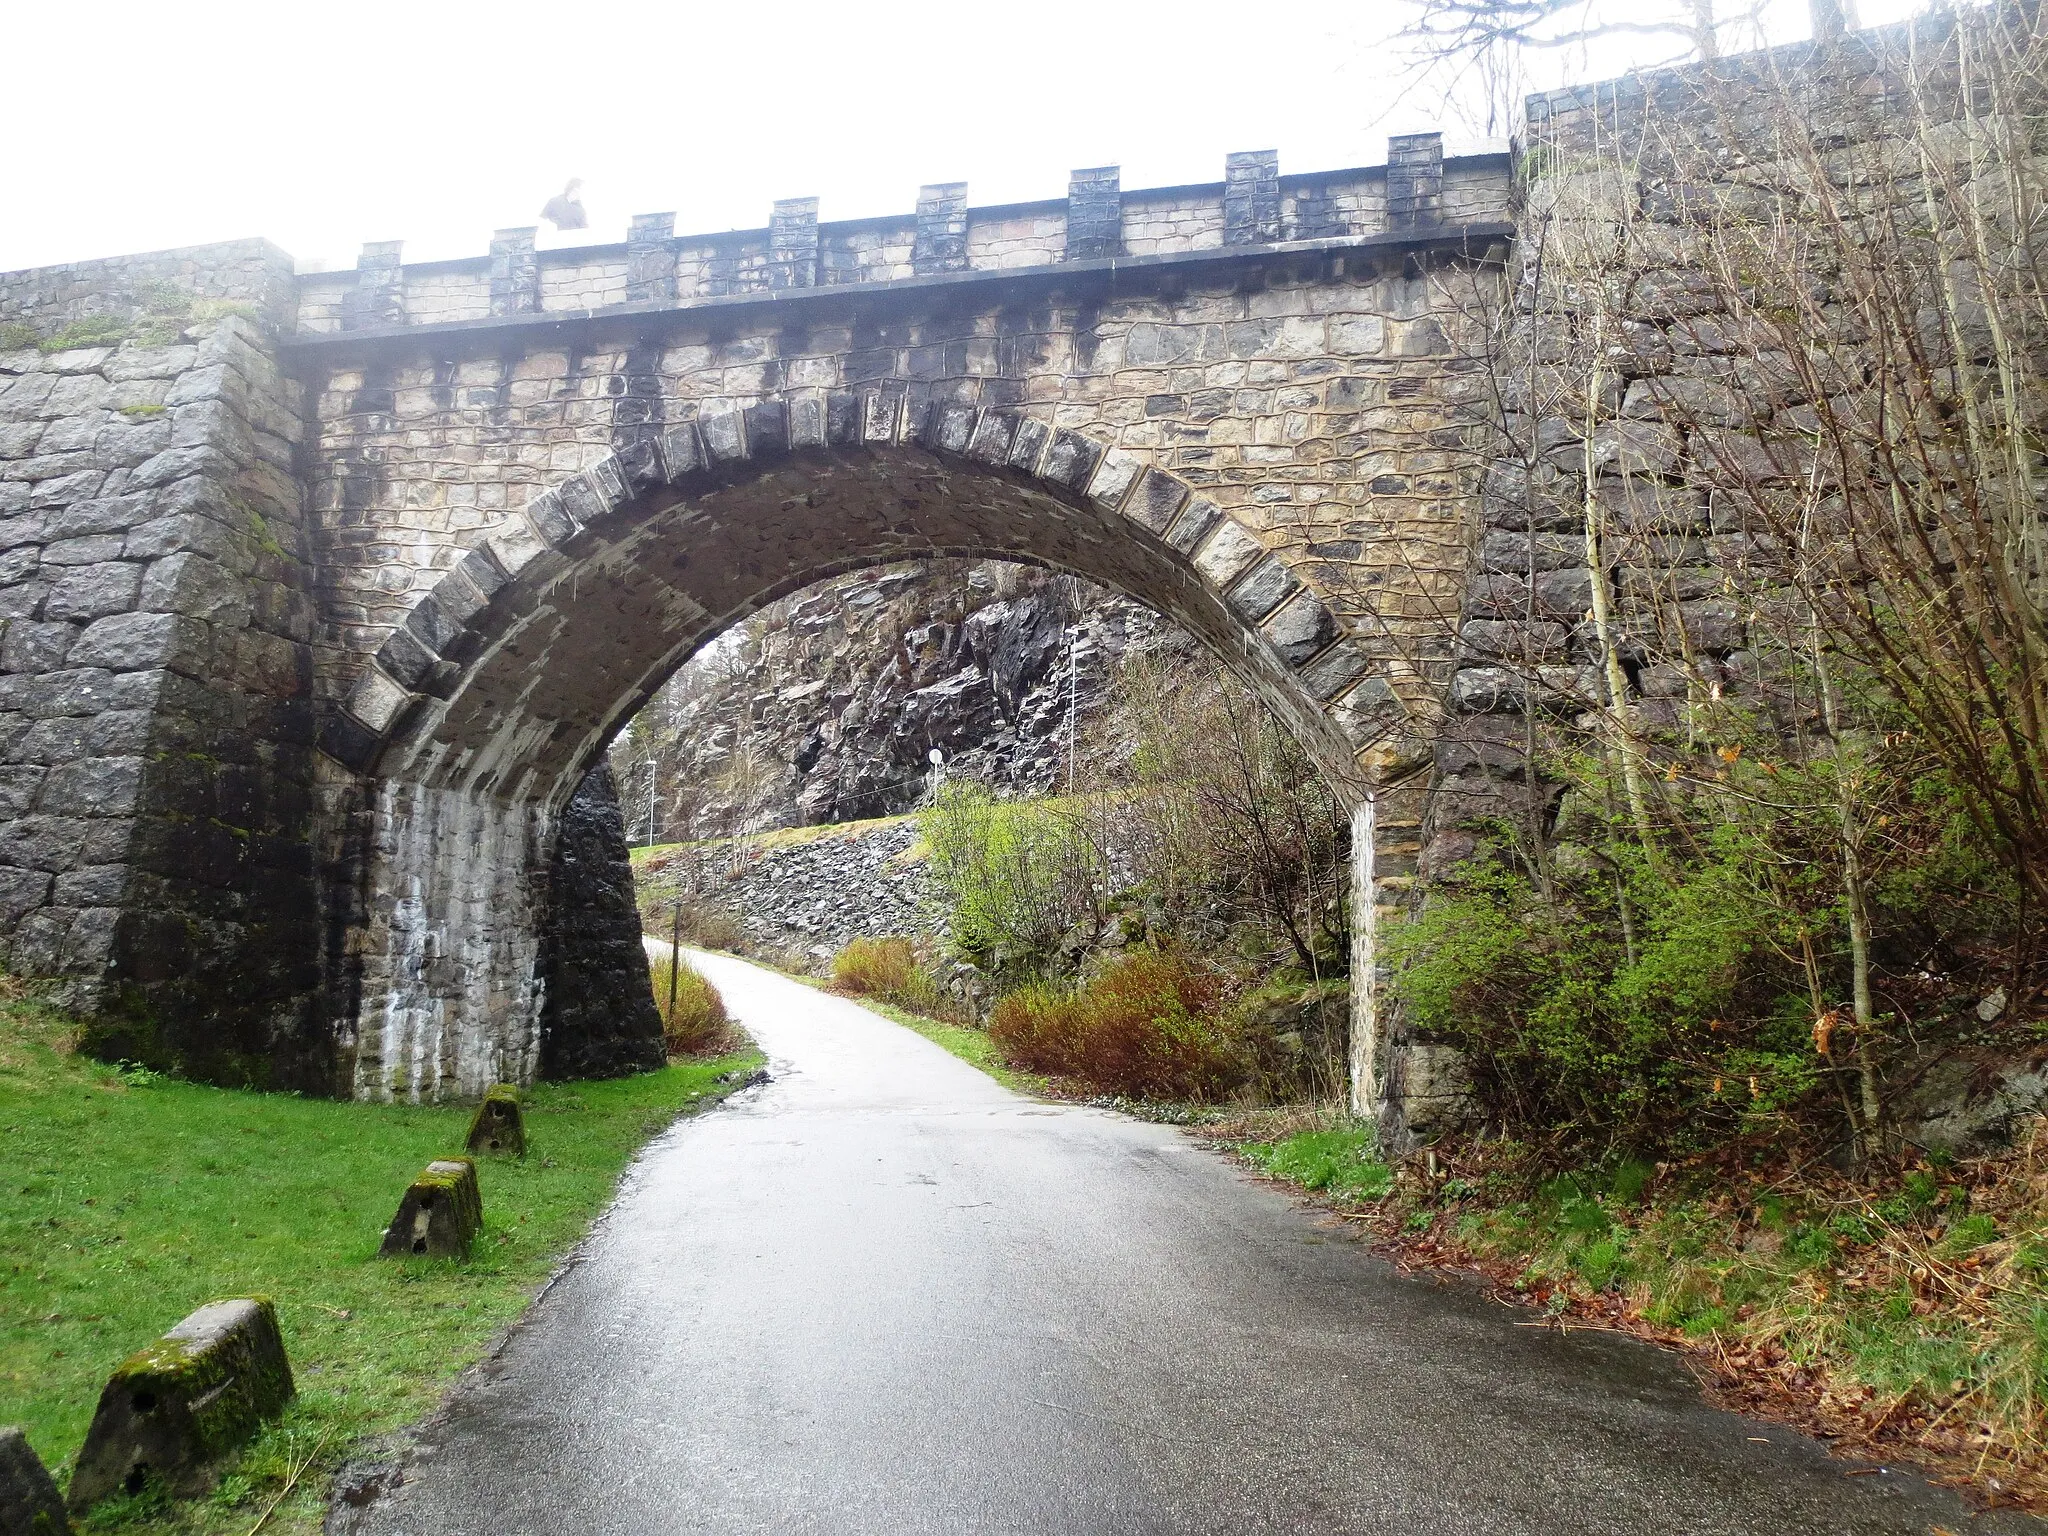 Photo showing: "Knuden" old bridge from 1922, in Lindesnes municipality, west of Kristiansand and along the now E-39 highway. Agder county, south Norway.